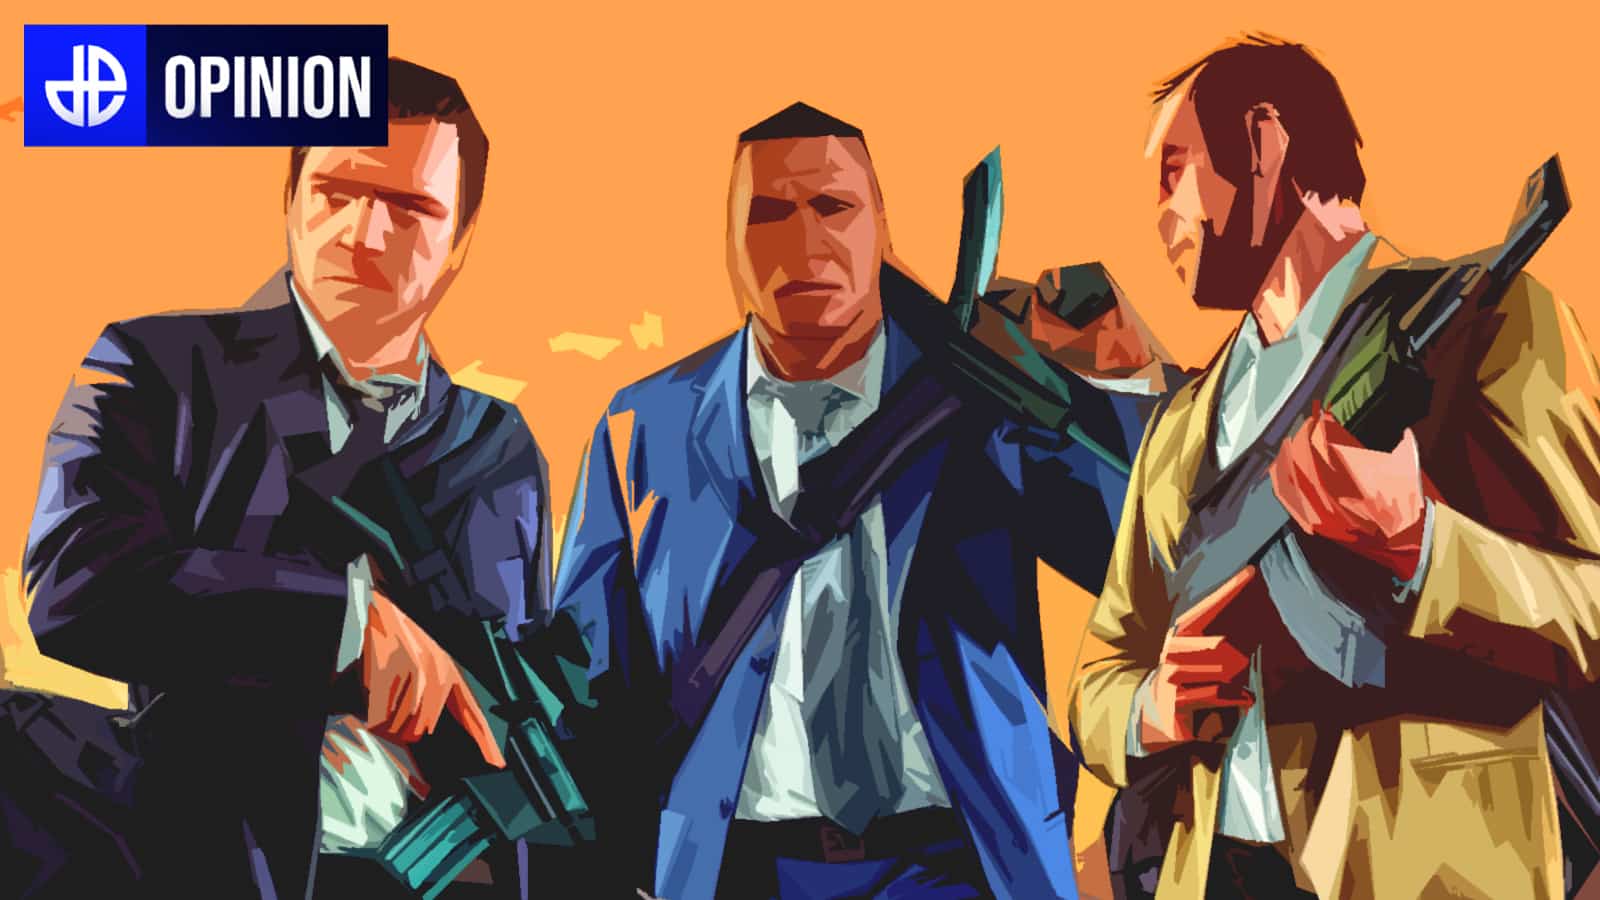 State of the Game: GTA Online - endless fun to be had, but at what cost?